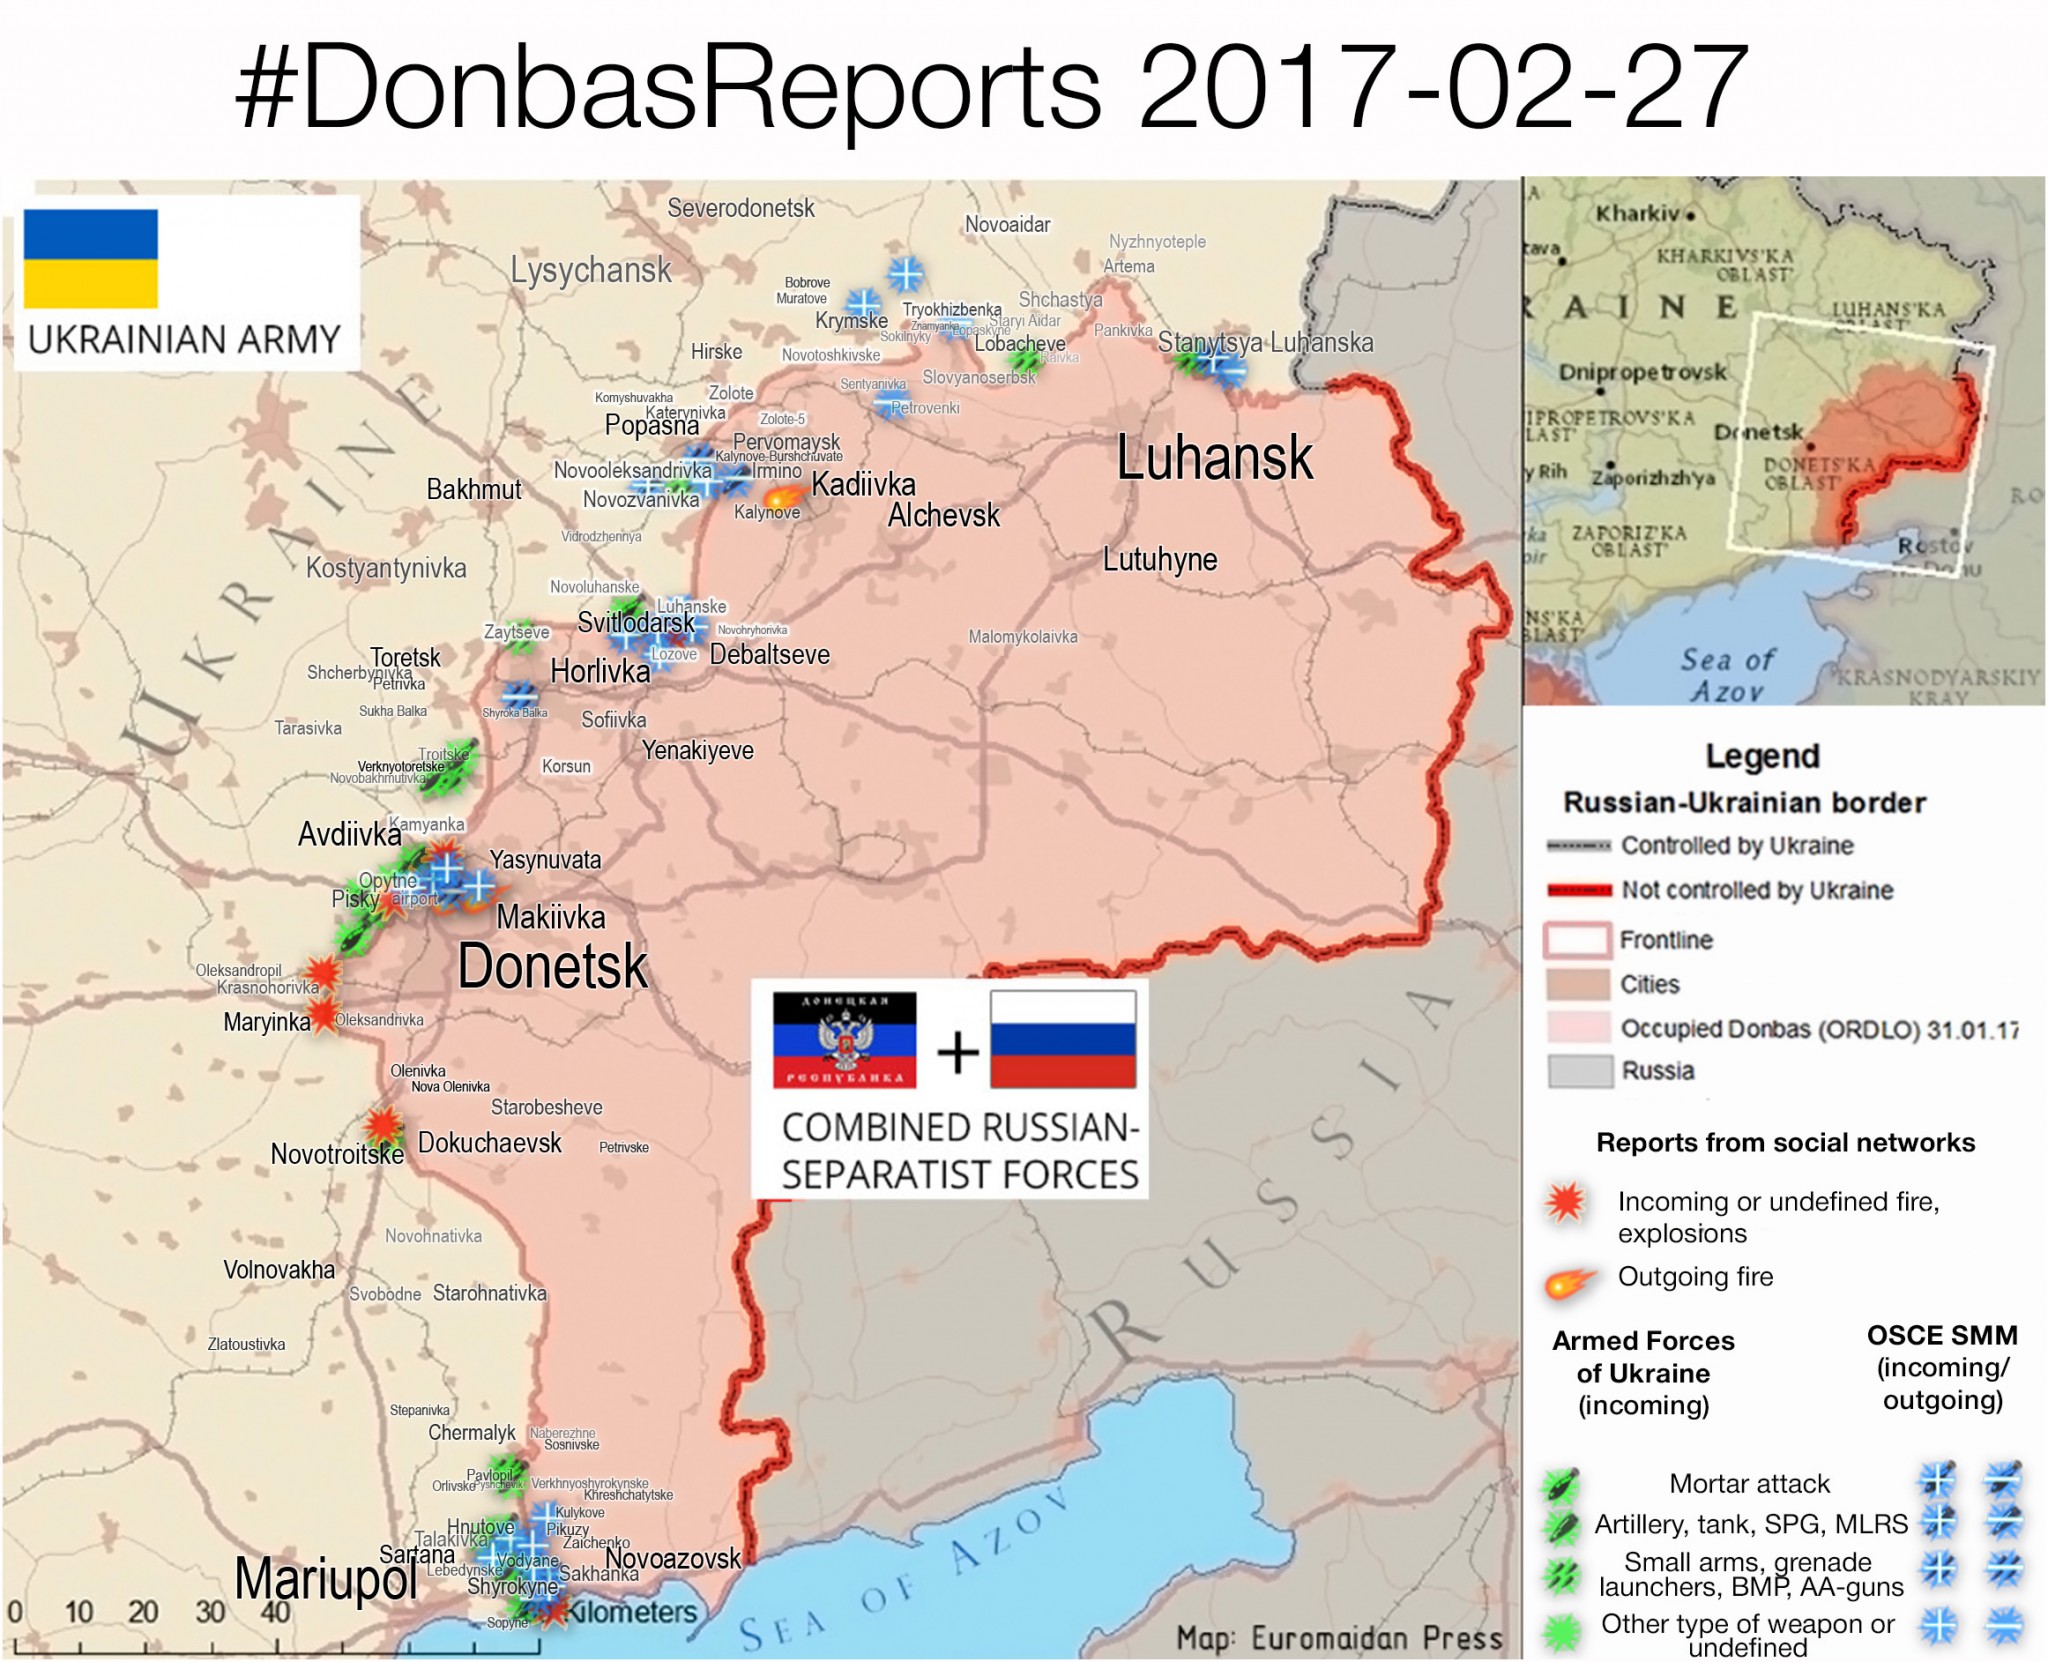 The situation in the Donbas on February 27, 2017, according to reports by local residents on social networks (red), ATO HQ (green), OSCE (blue). 